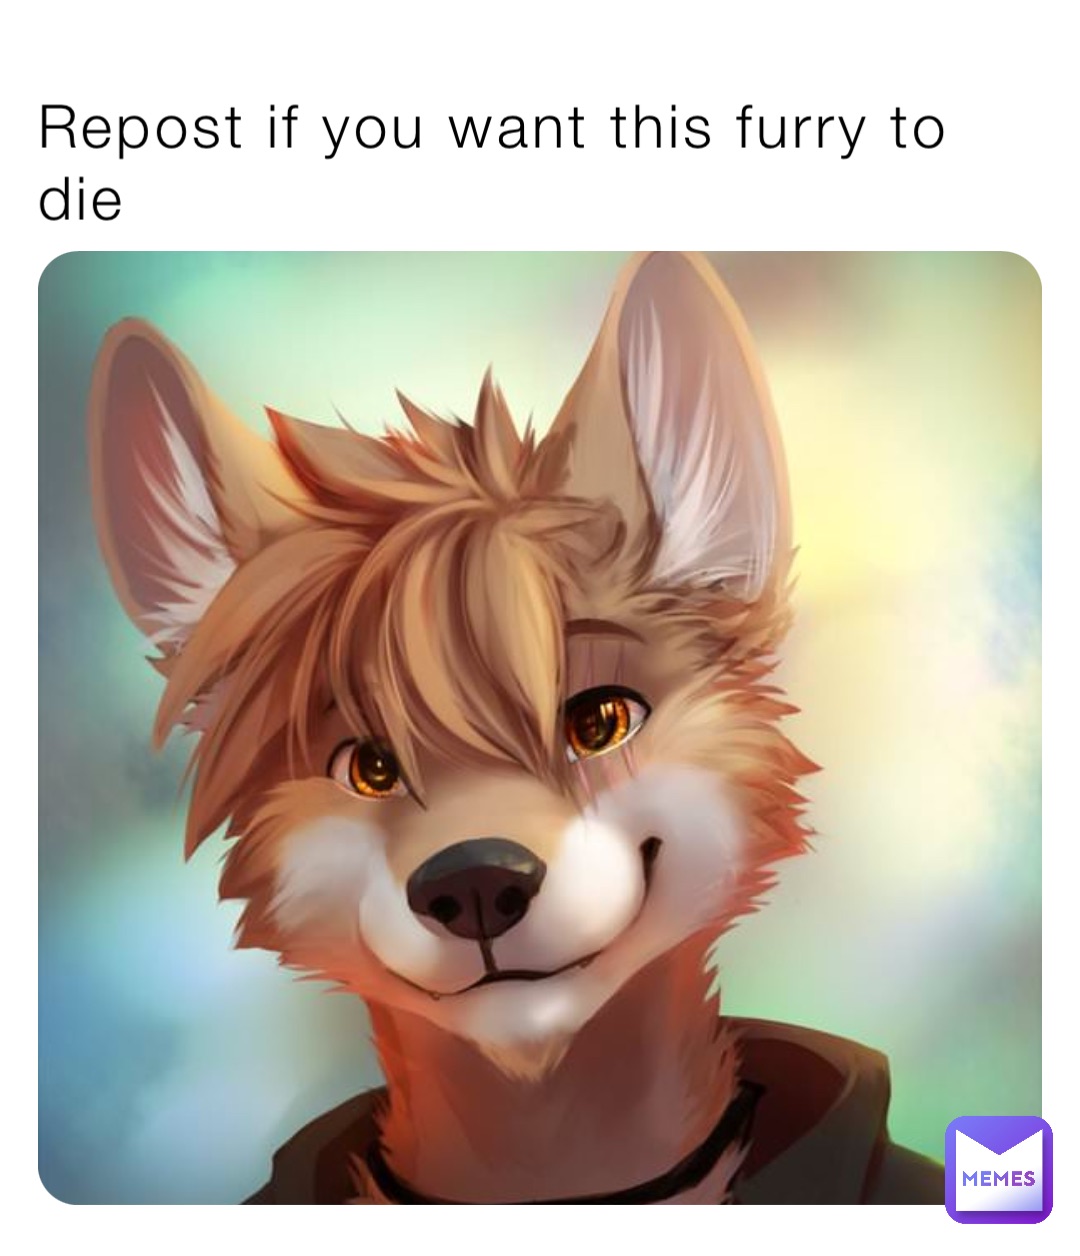 Repost if you want this furry to die